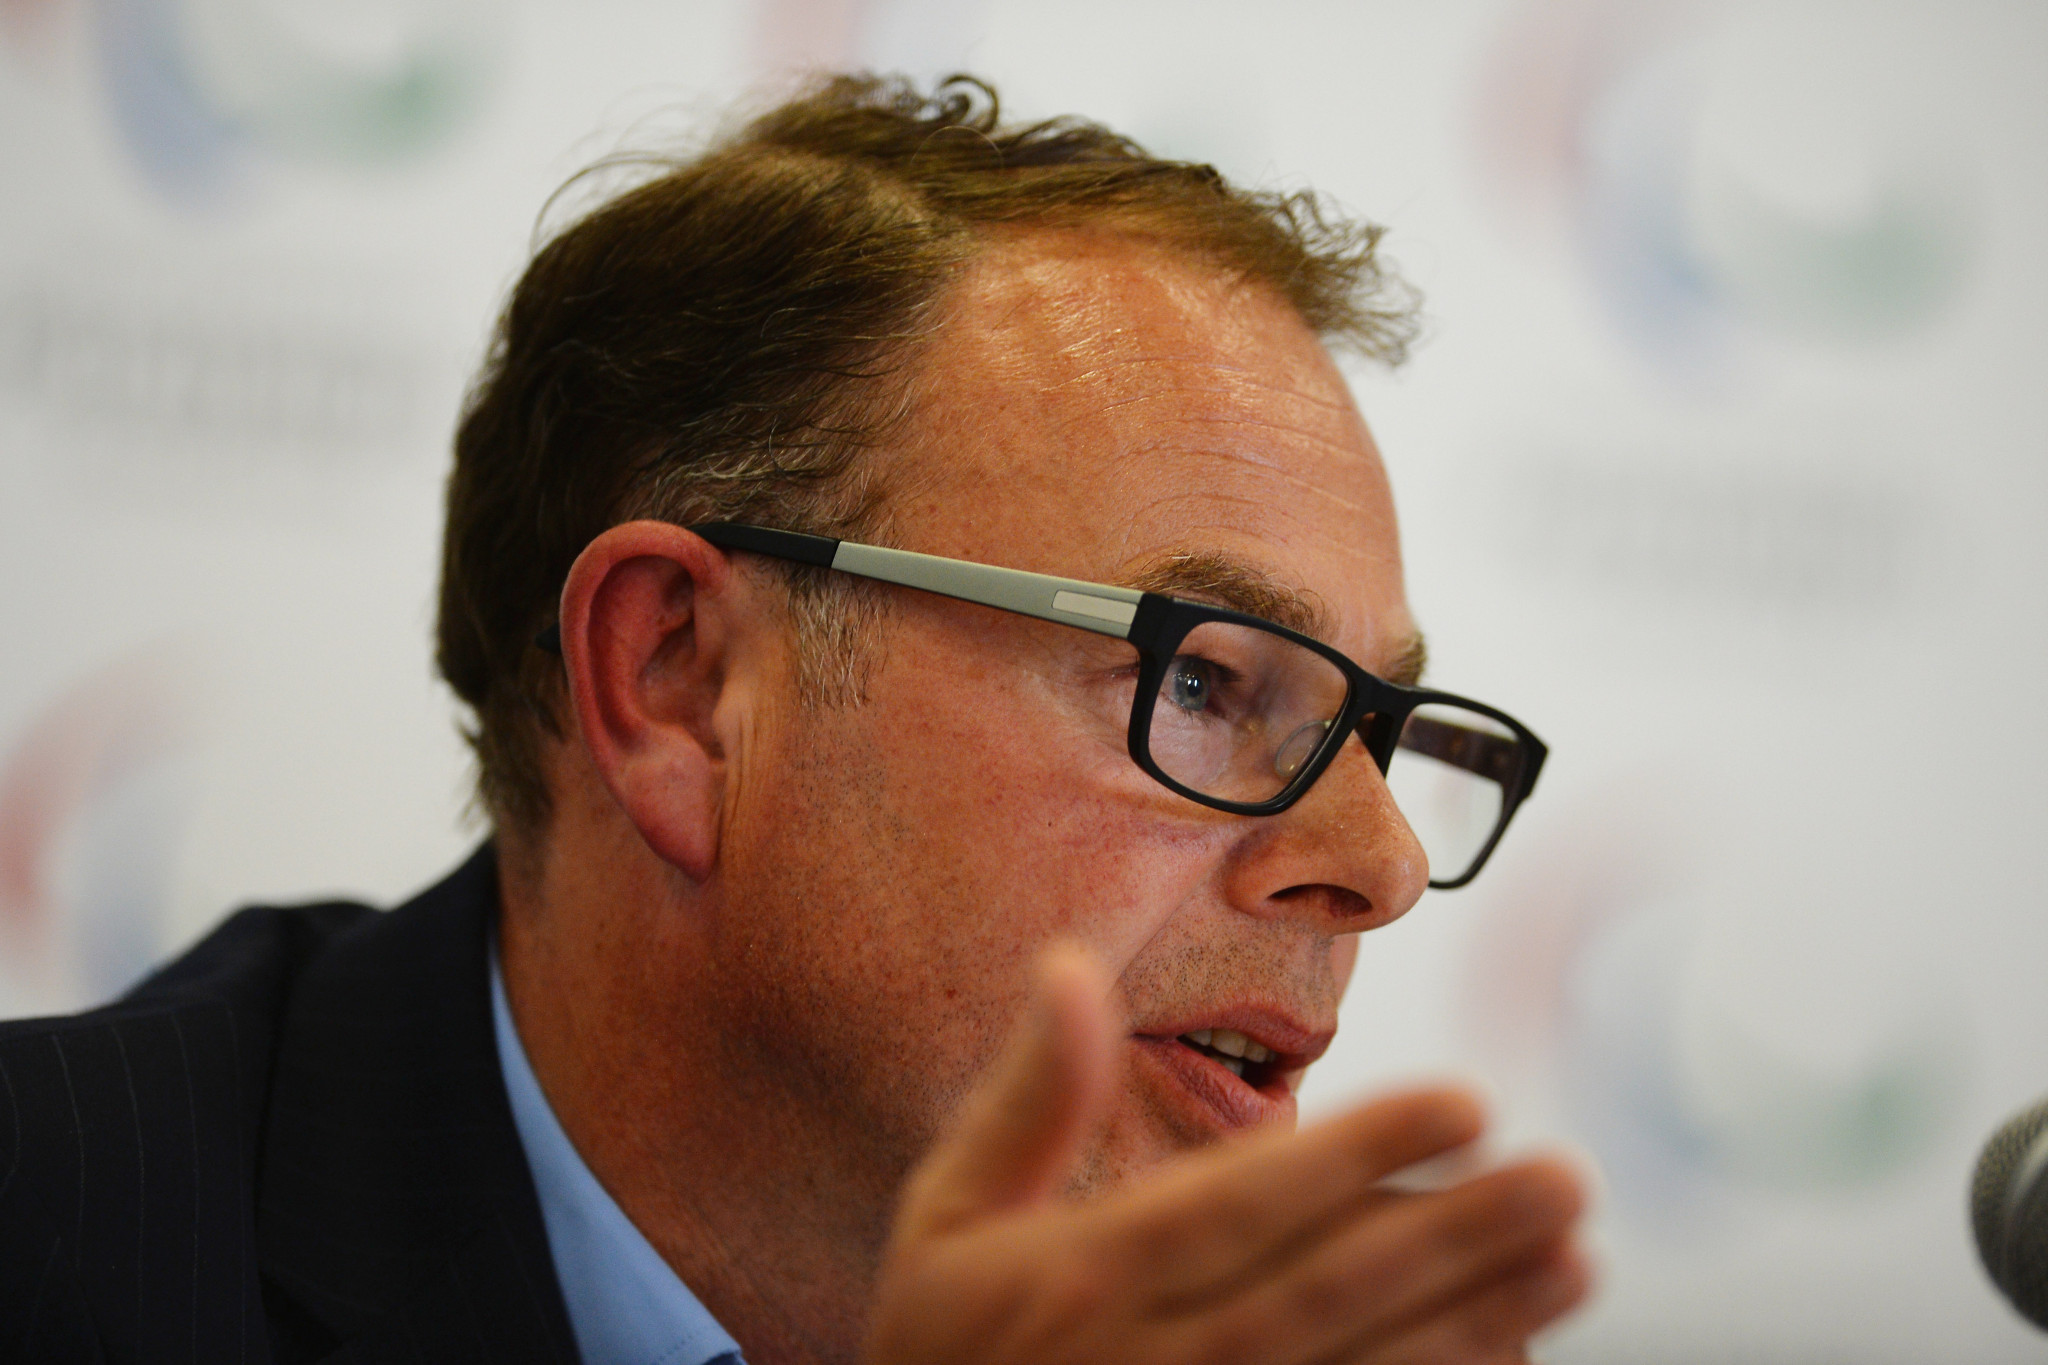 Parkinson steps down as British Rowing chief executive after six years and difficult Tokyo 2020 Olympics